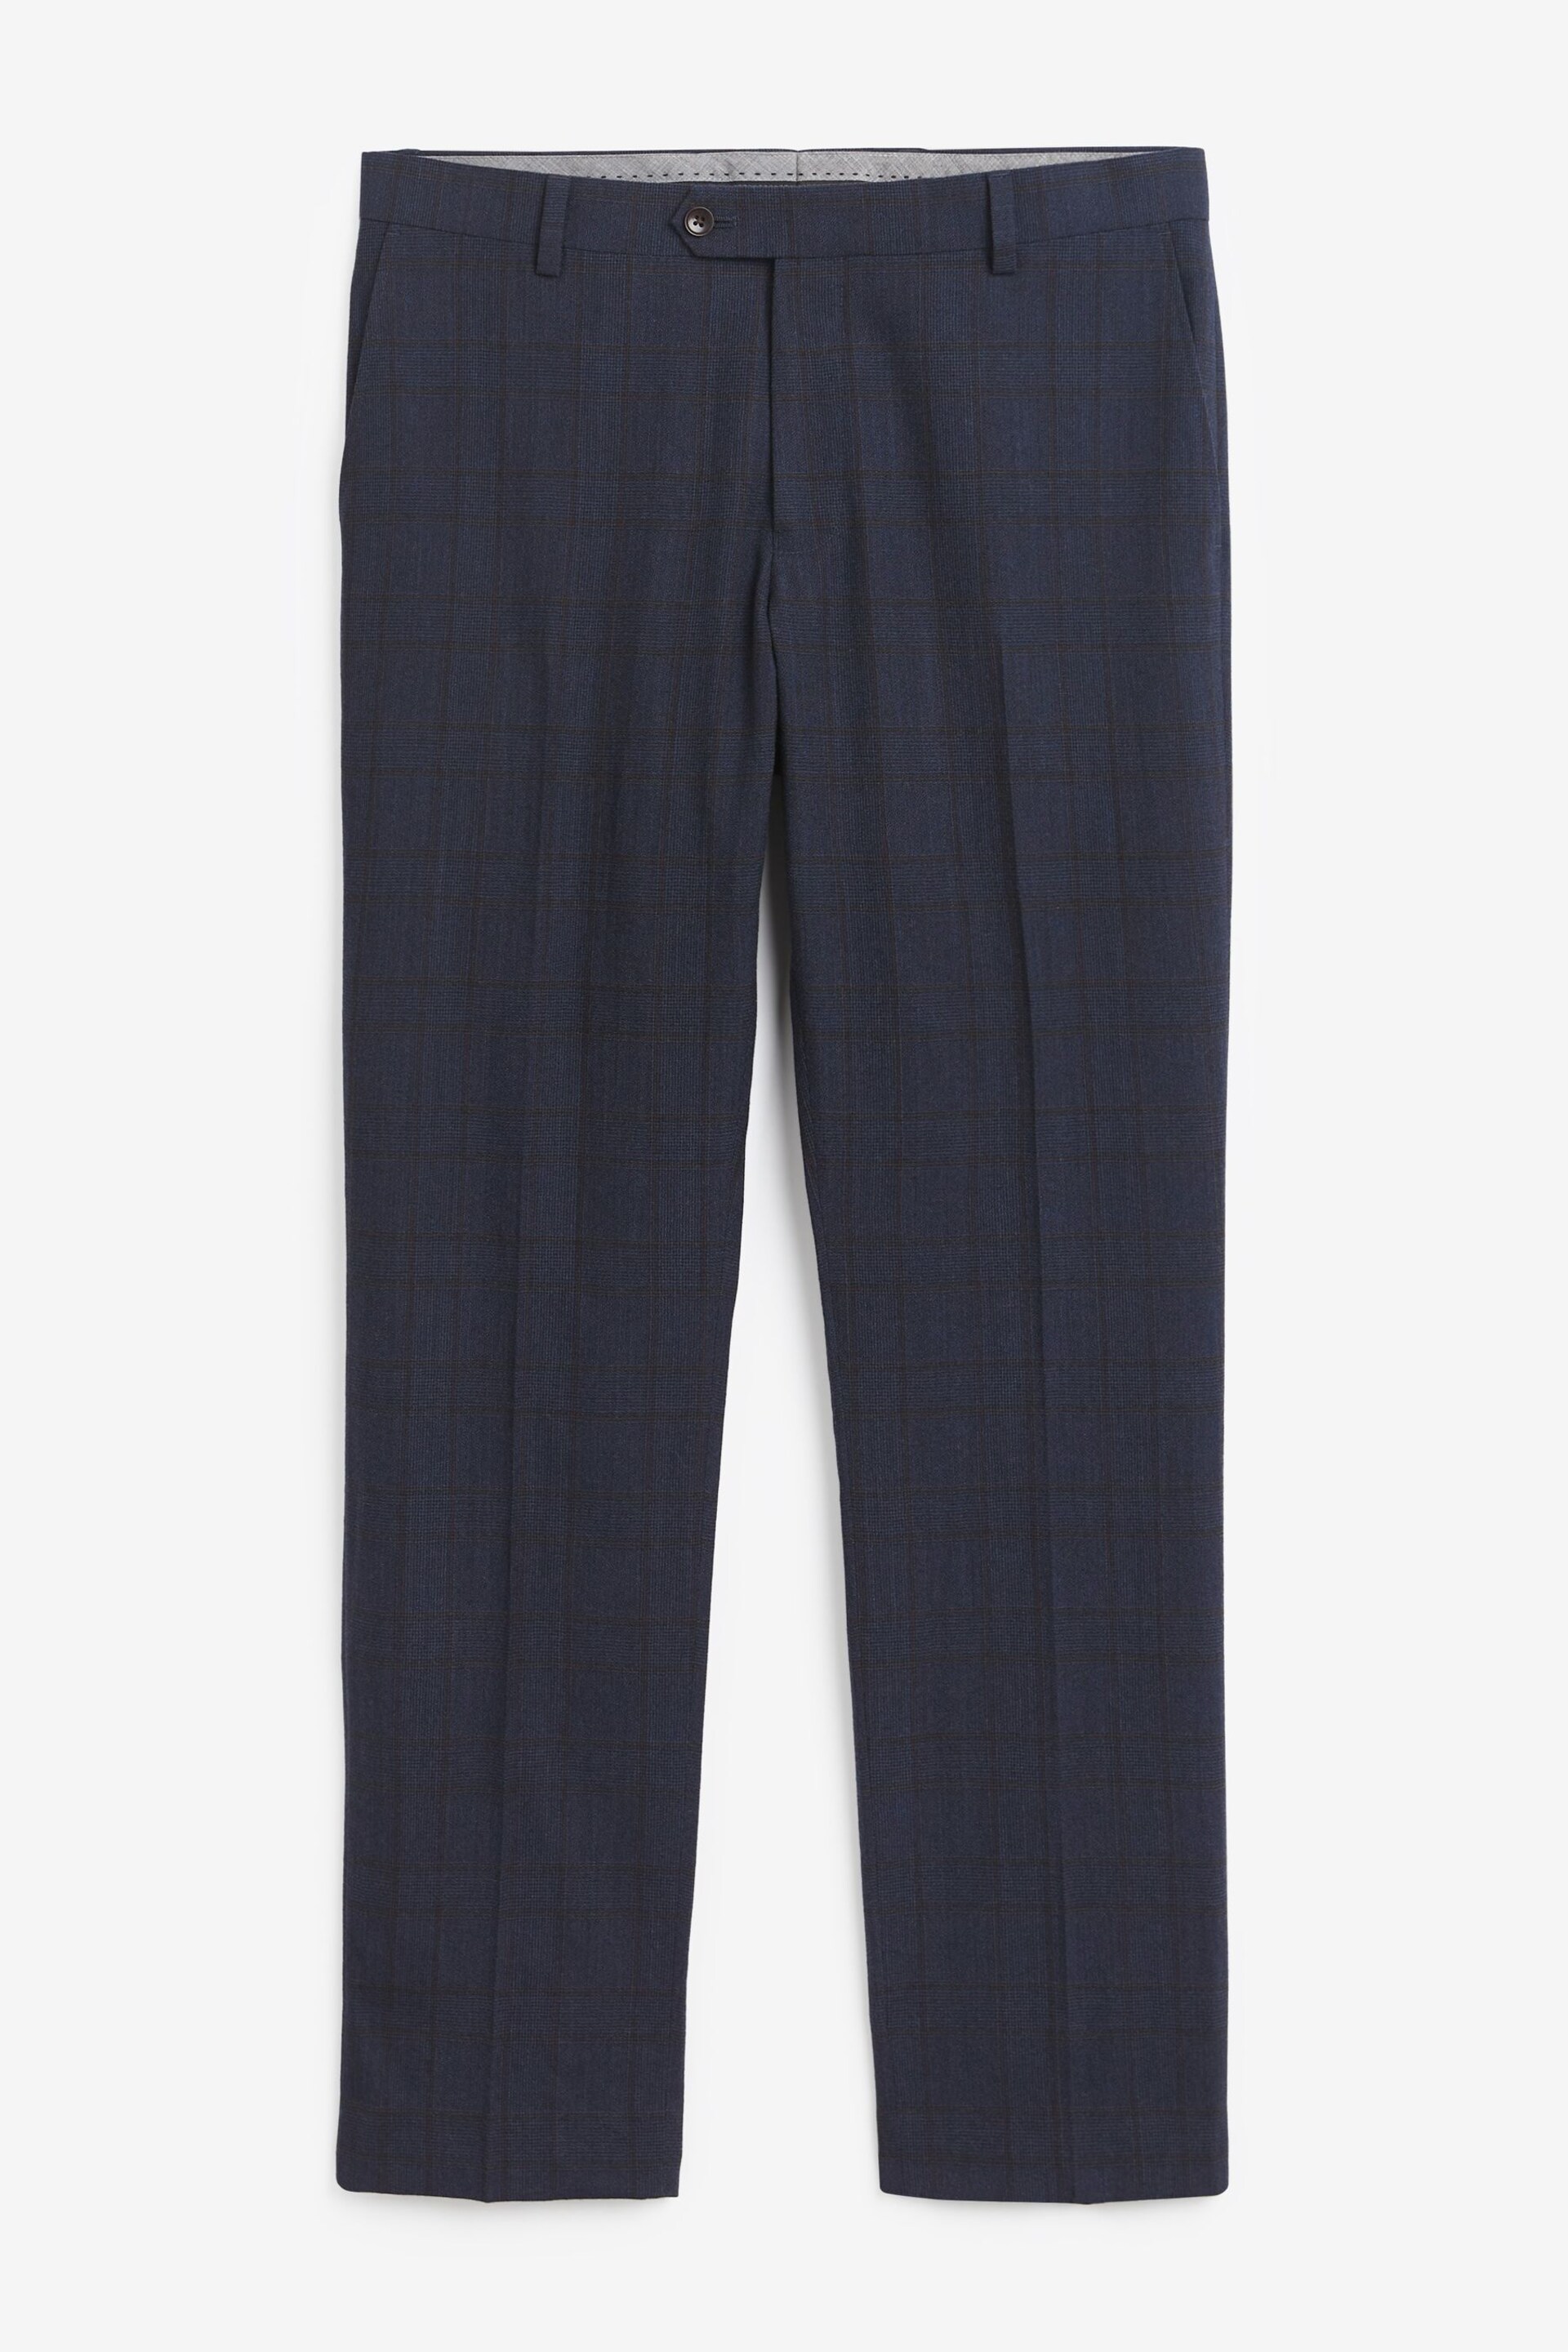 Navy Signature Italian Fabric Check Suit: Trousers - Image 7 of 12